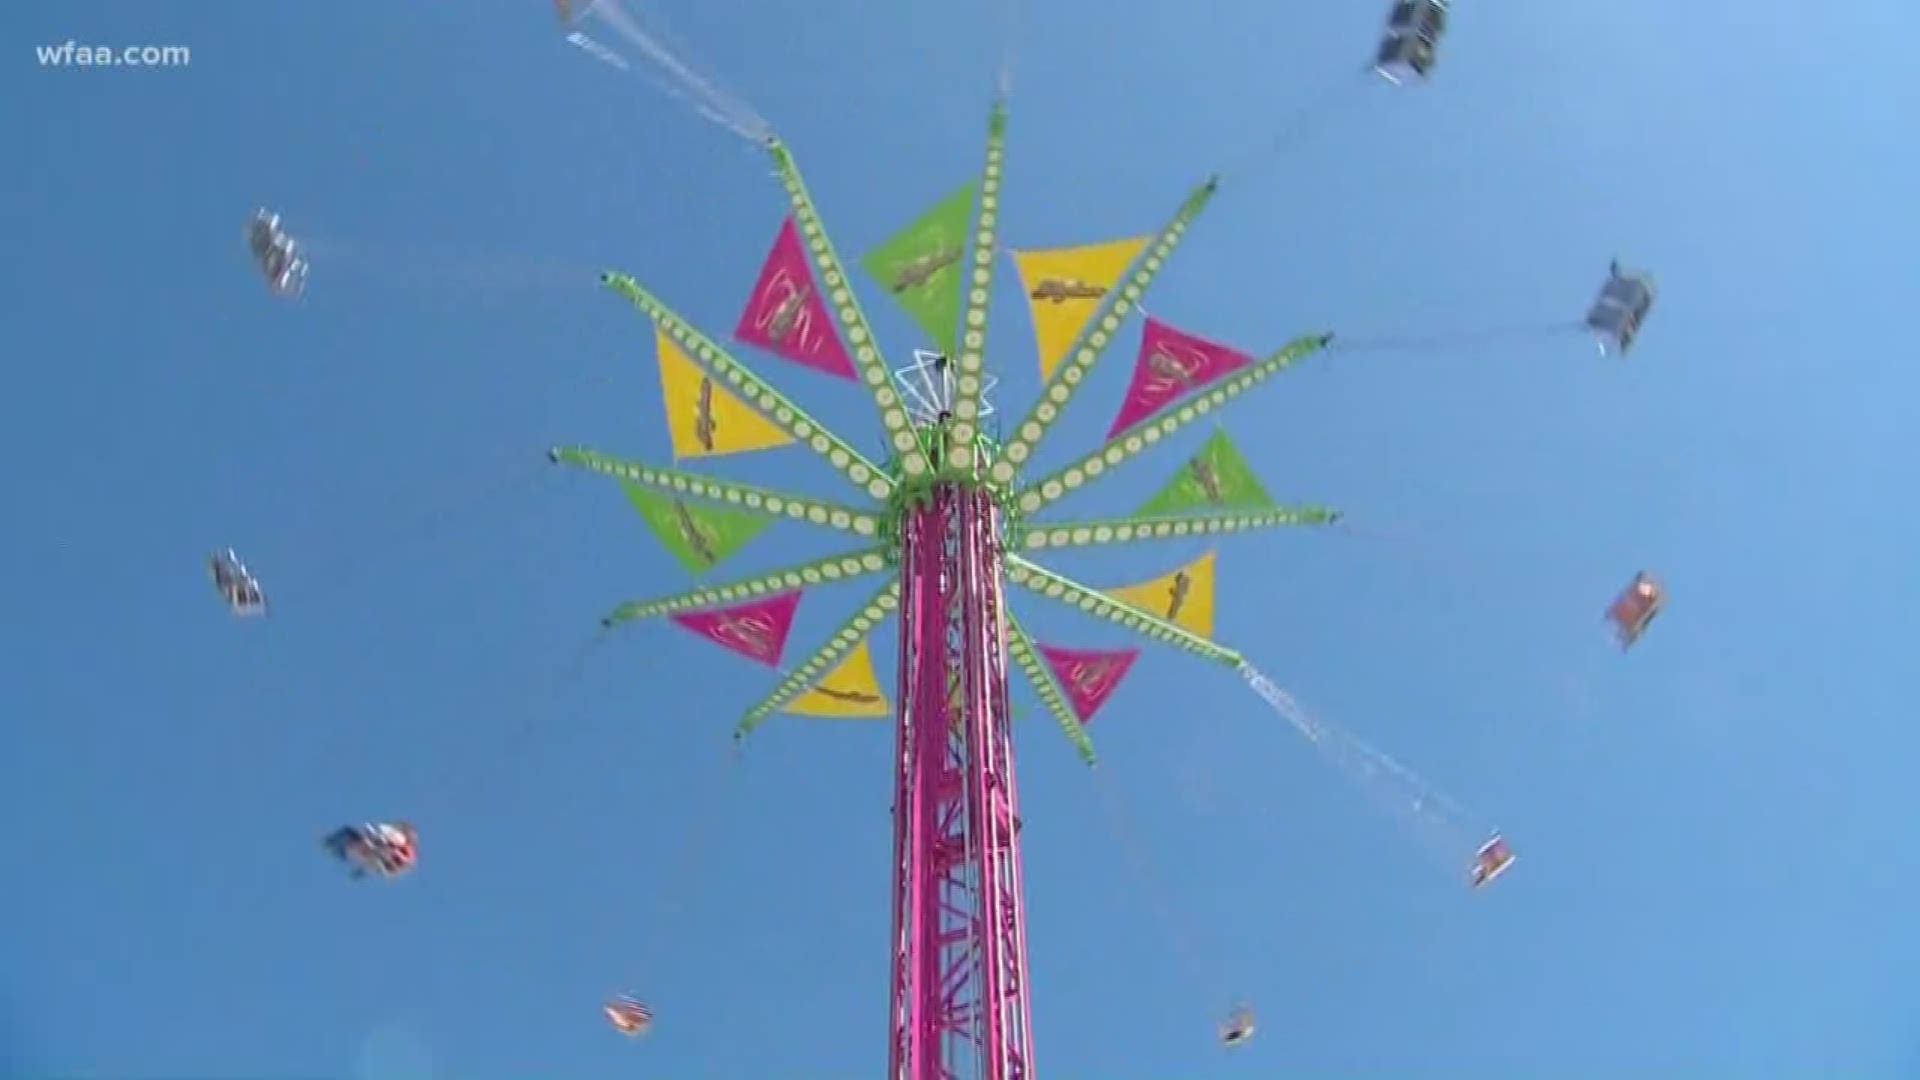 It's the perfect combination of fun and food. The State Fair of Texas runs through Oct. 20.